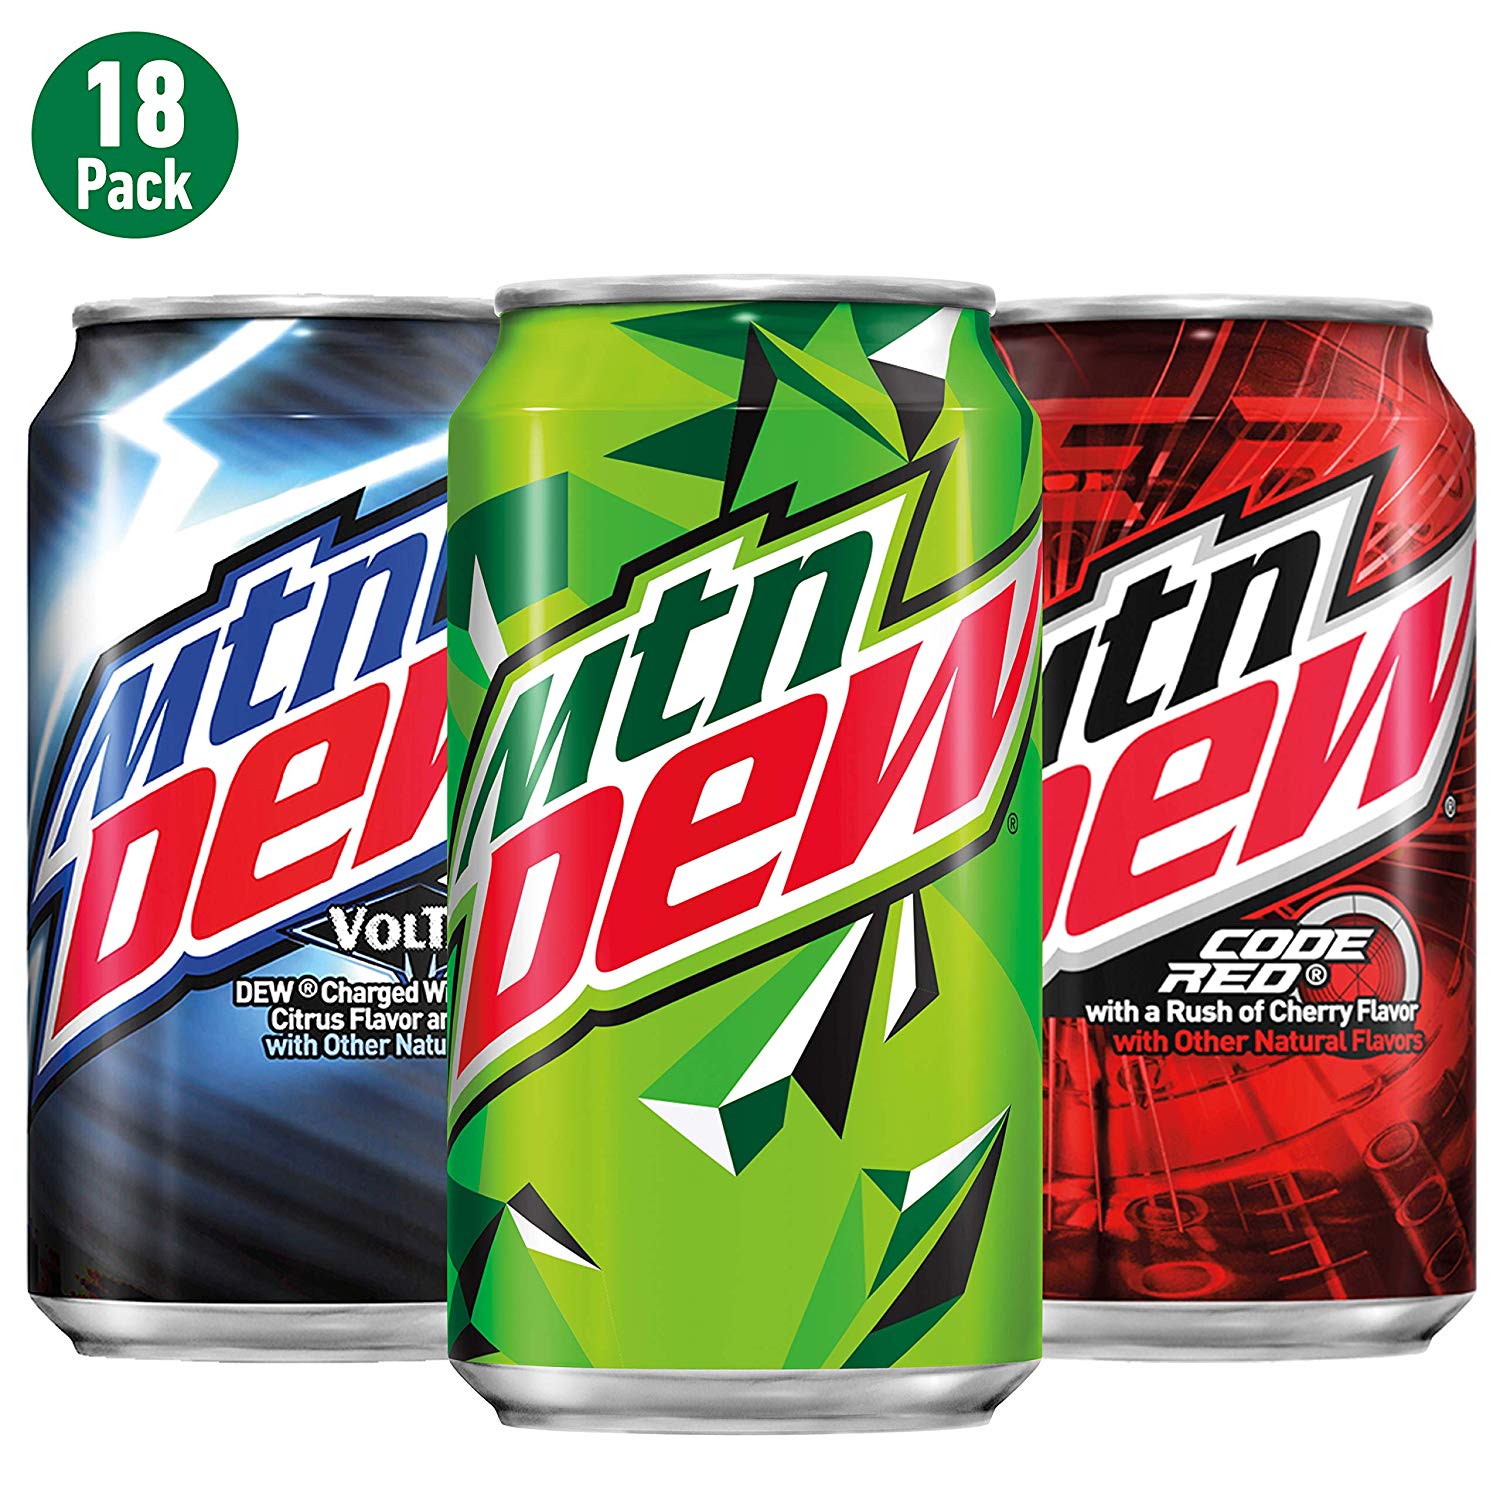 Soda Variety Pack with Mountain Dew, Dew Code Red, and Dew Voltage, 12 Fl Oz Cans, Pack of 18